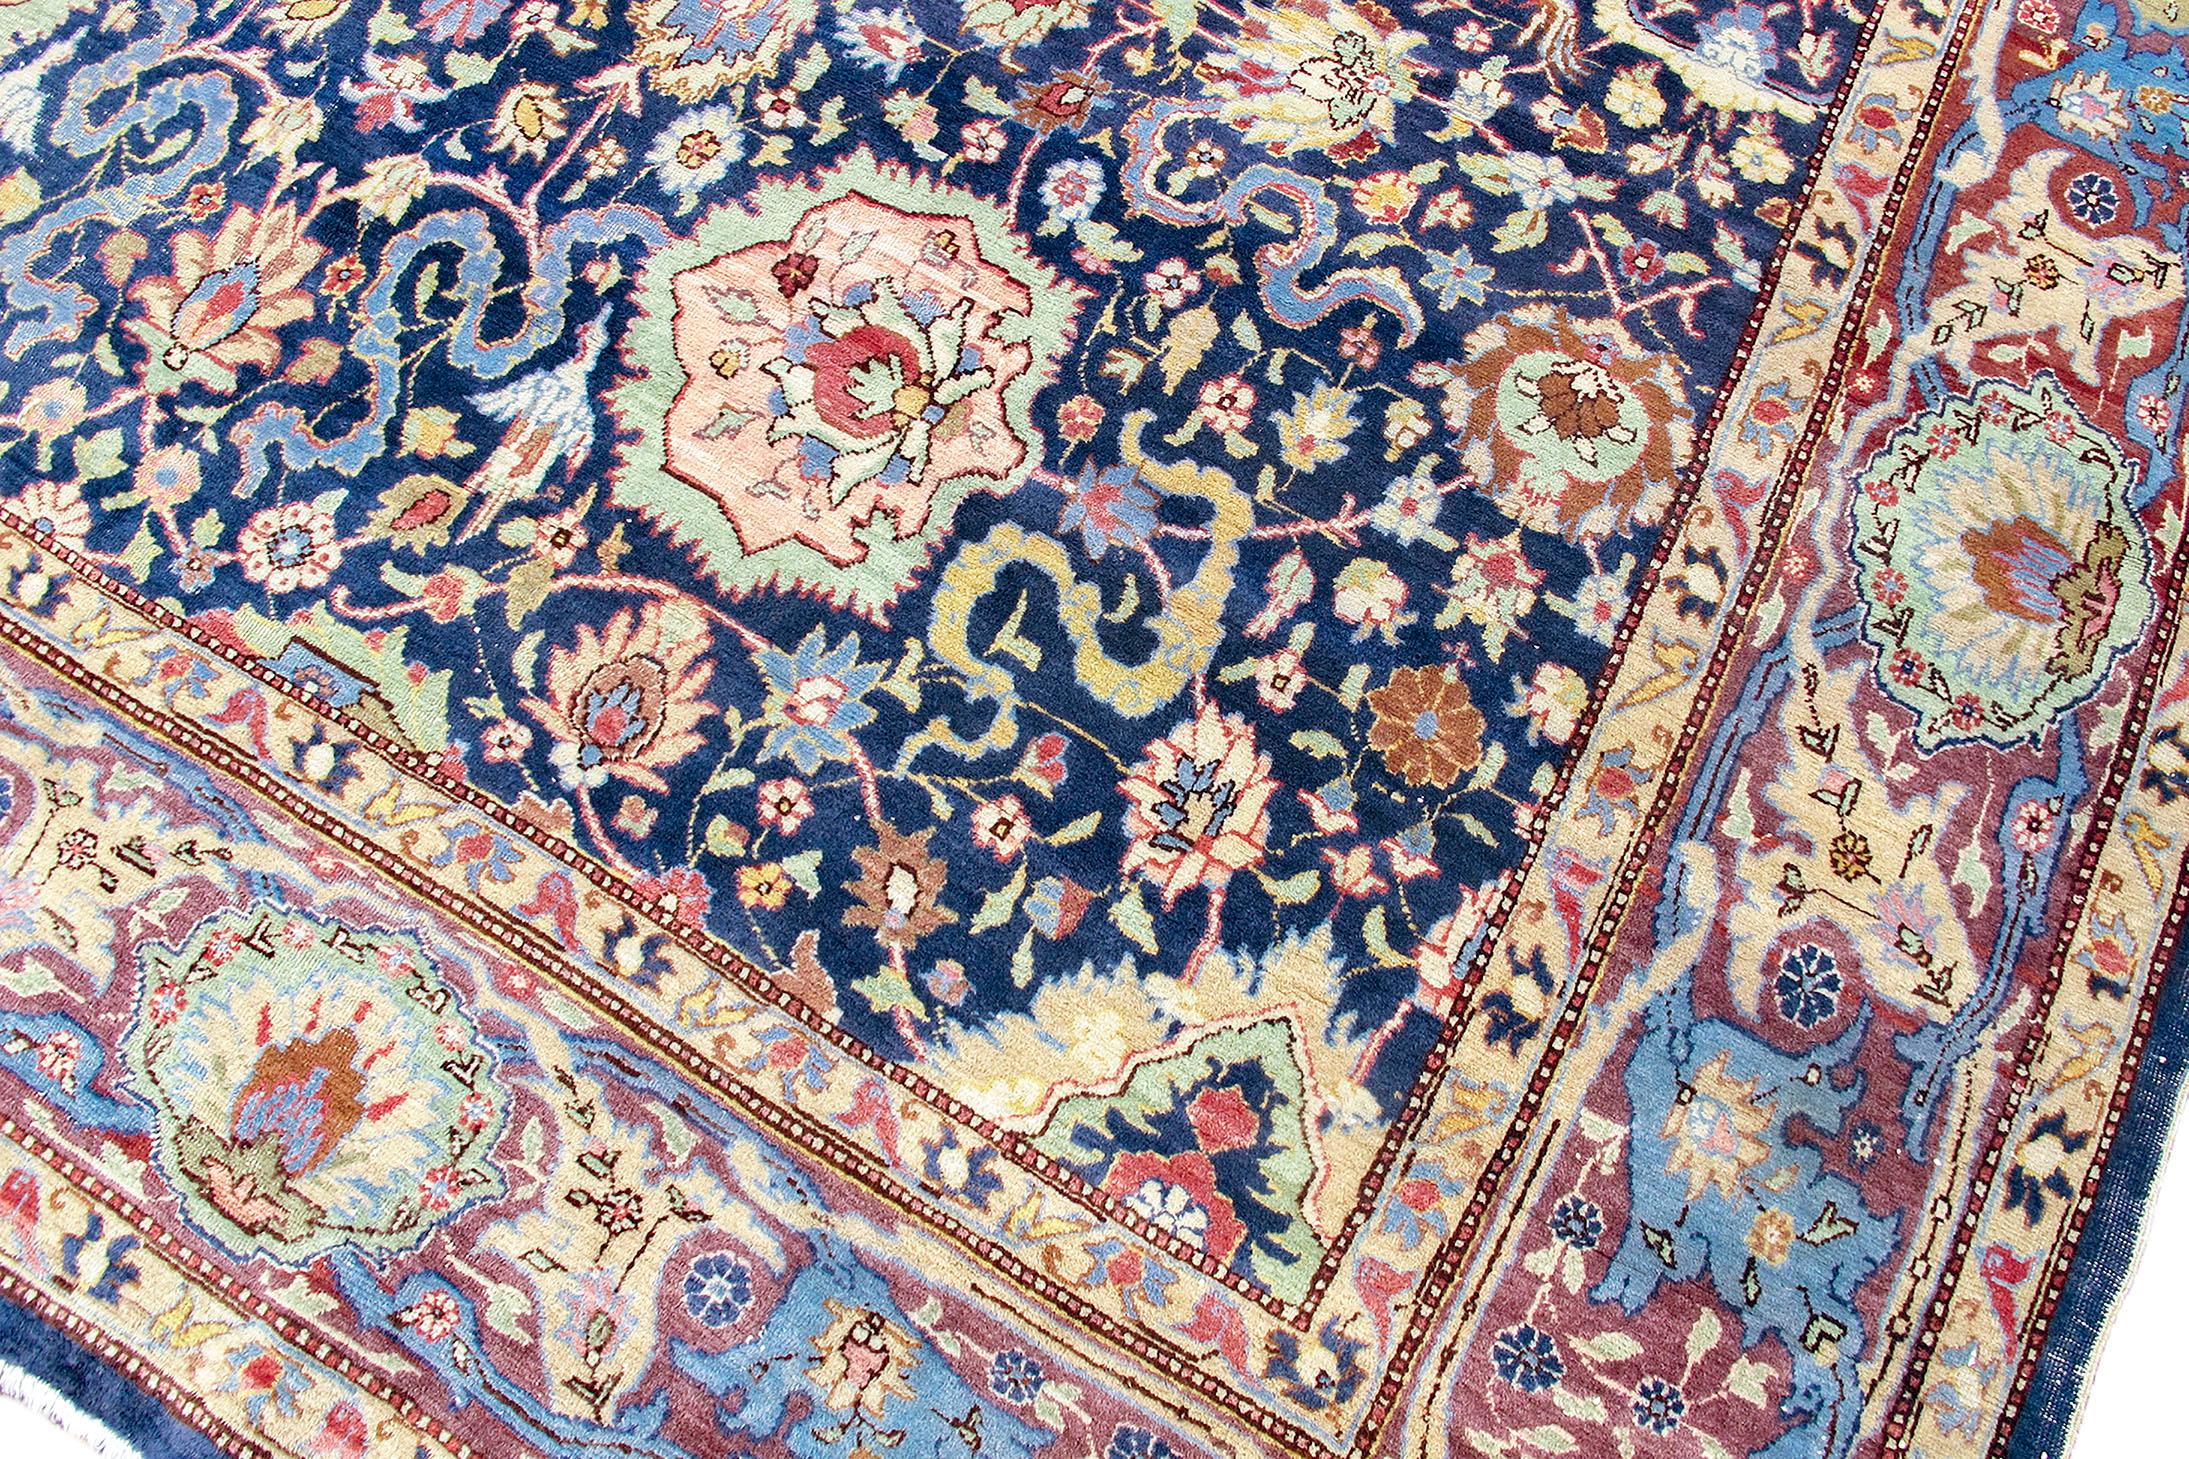 Antique Persian Hereke Carpet, c. 1900

This oversized Hereke carpet from Turkey draws an intricate design of palmettes and cloud bands within a lattice against an indigo field. Turn-of-the-century Hereke pieces such as this often employ a series of